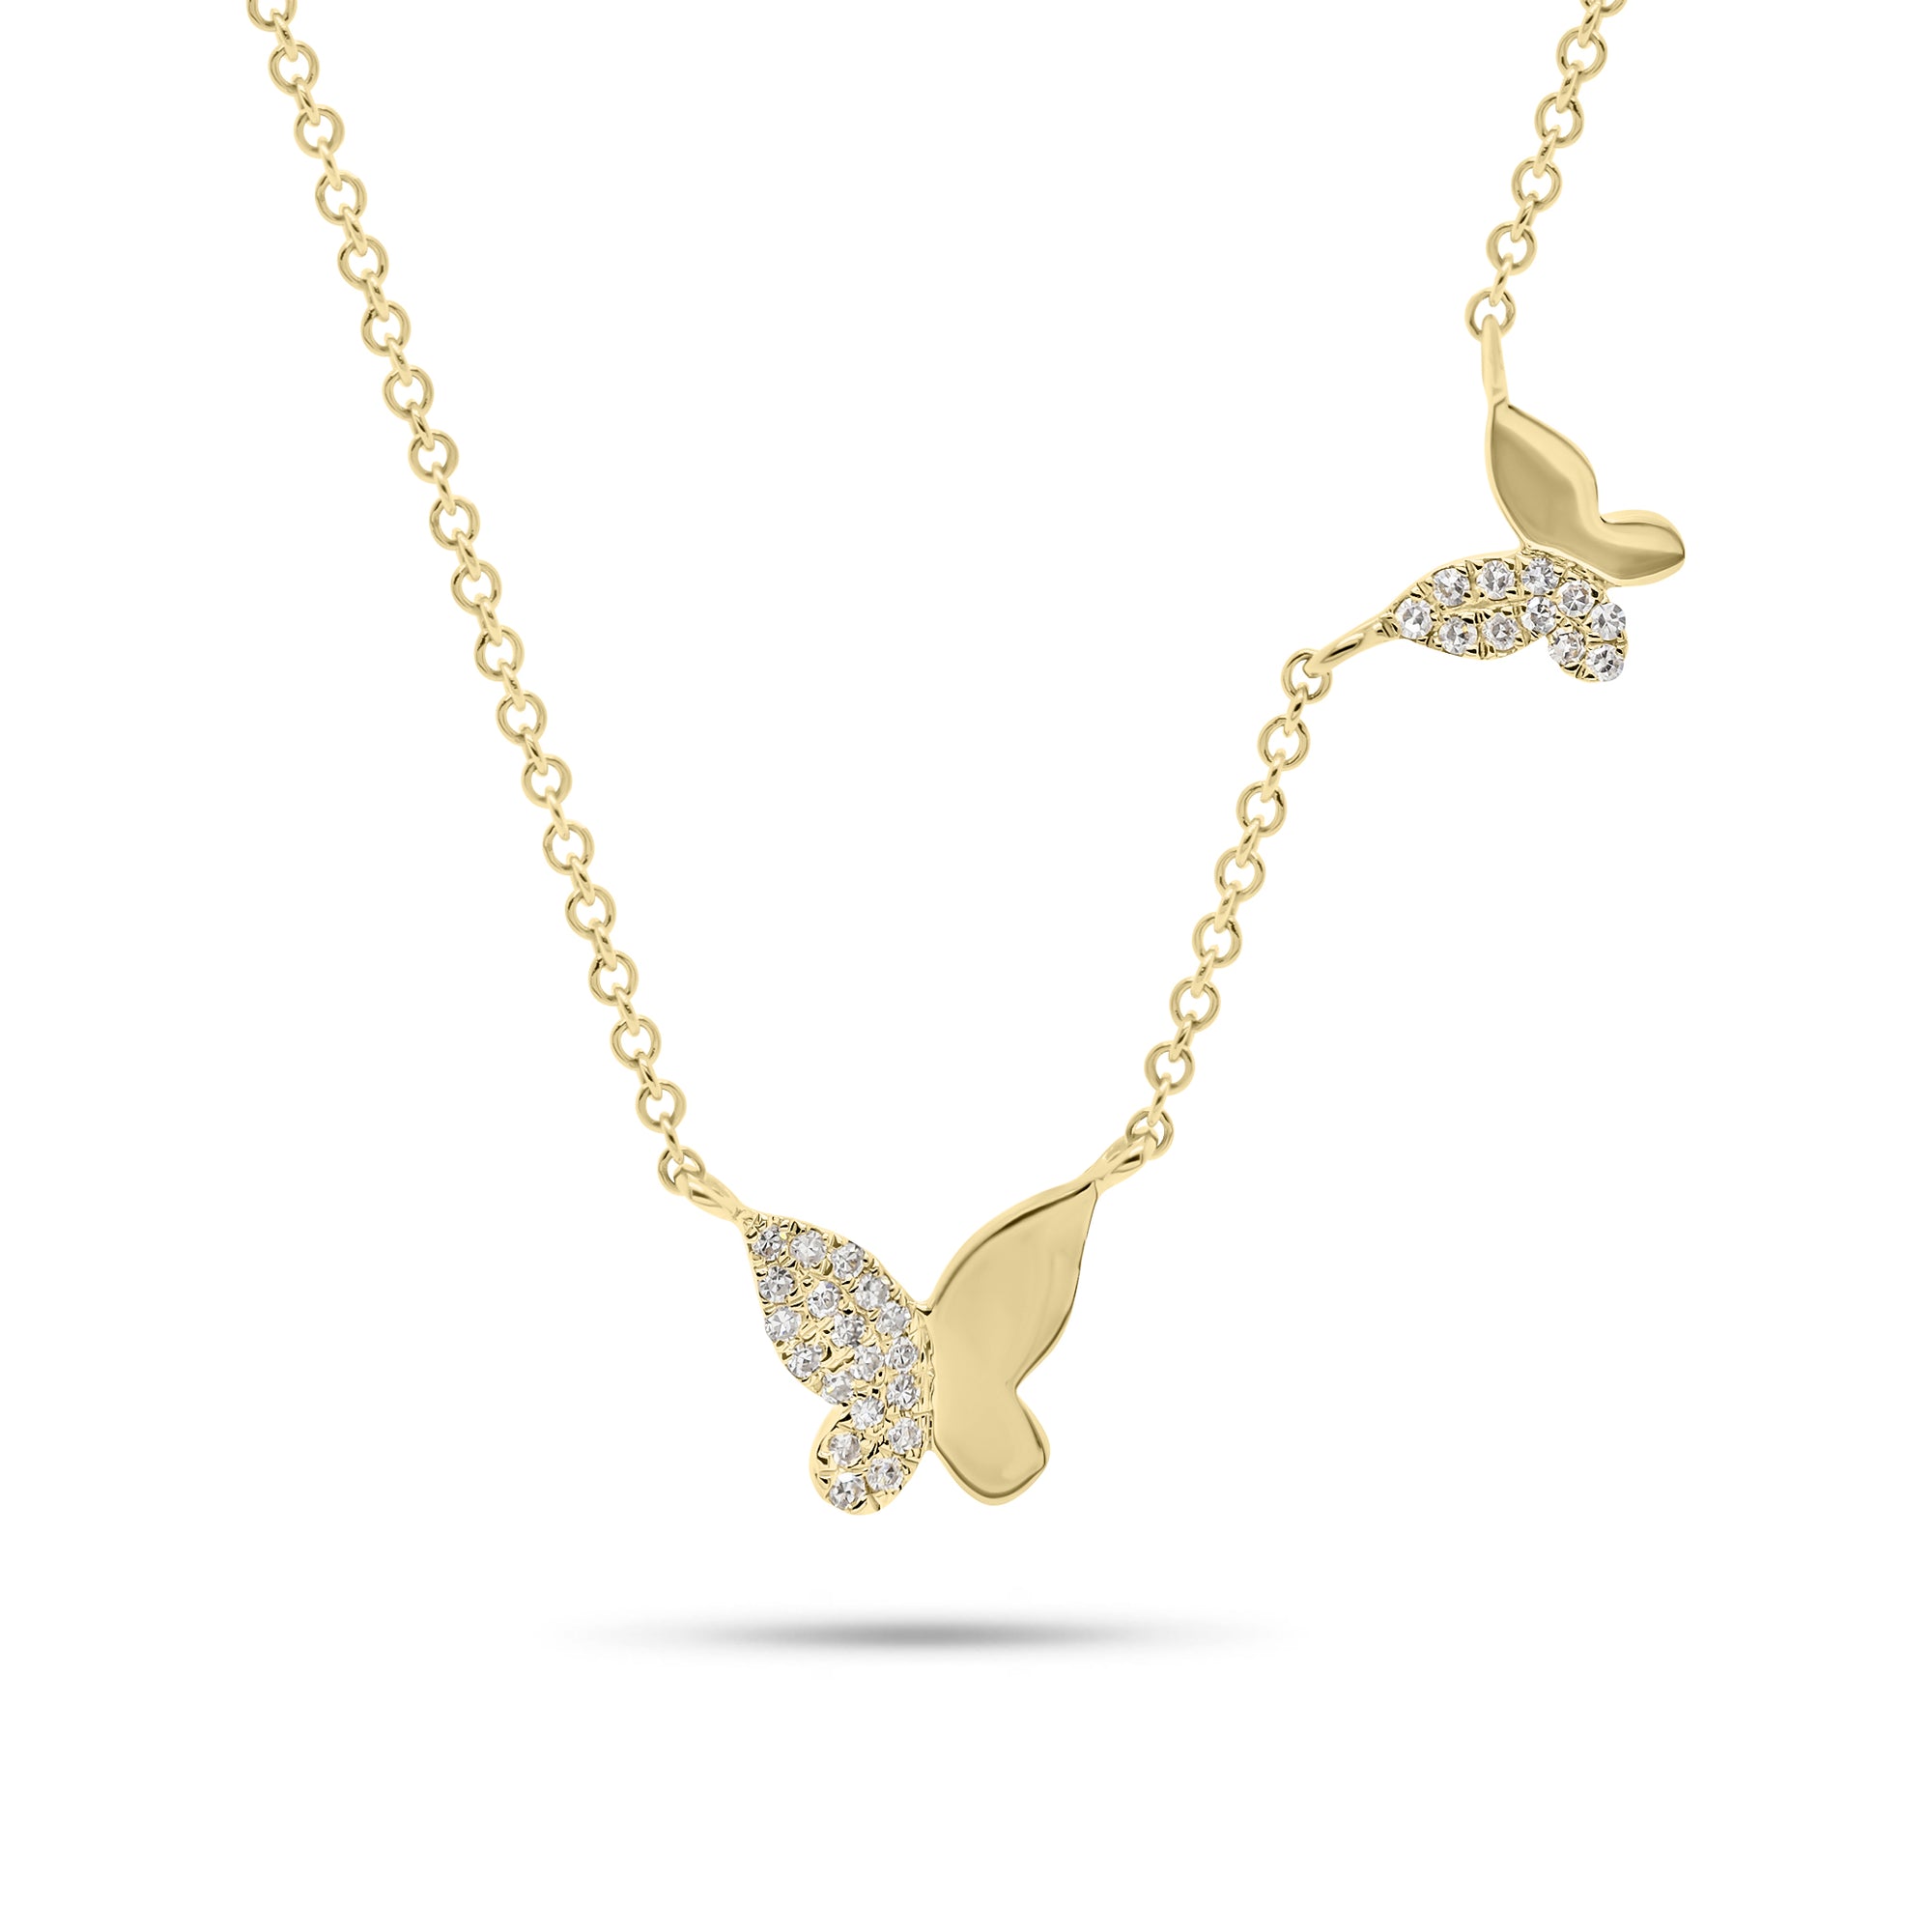 Diamond Butterfly Duo Necklace - 14K gold weighing 1.91 grams  - 30 round diamonds weighing 0.07 carats